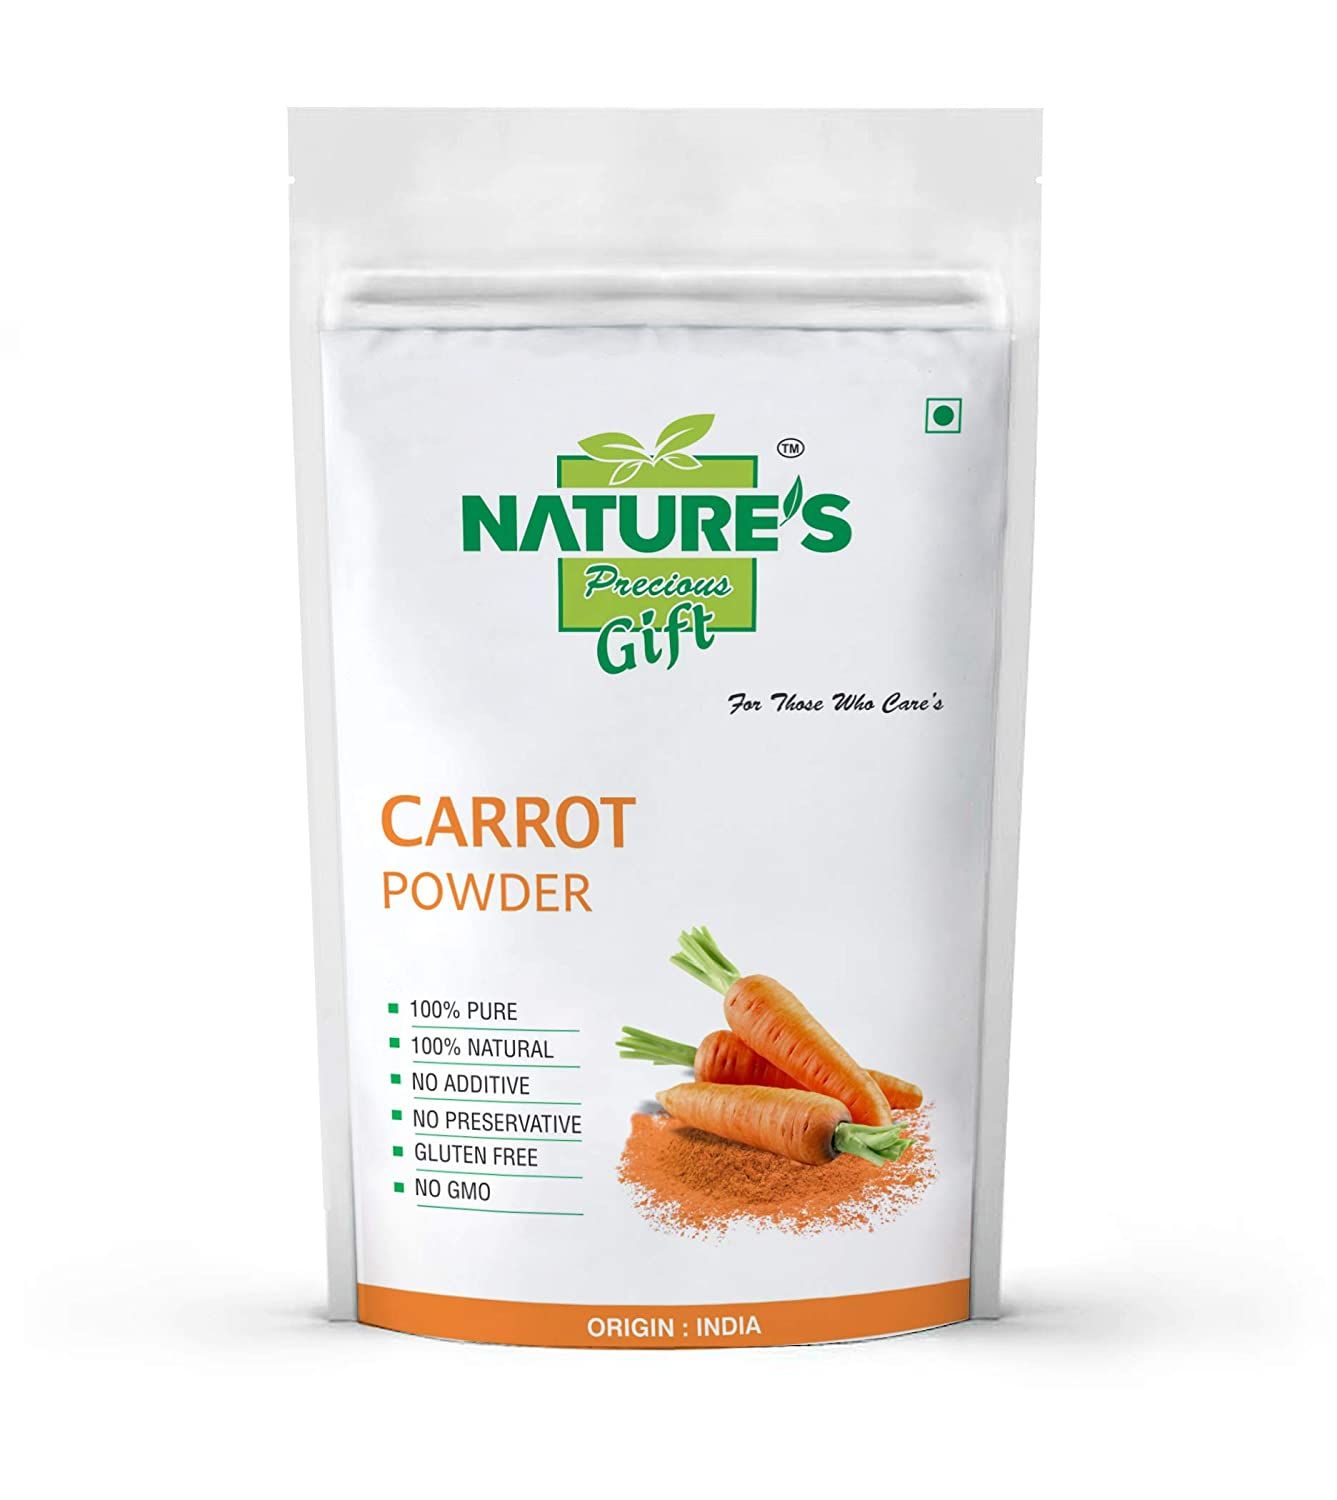 Nature's Gift Carrot Powder Image